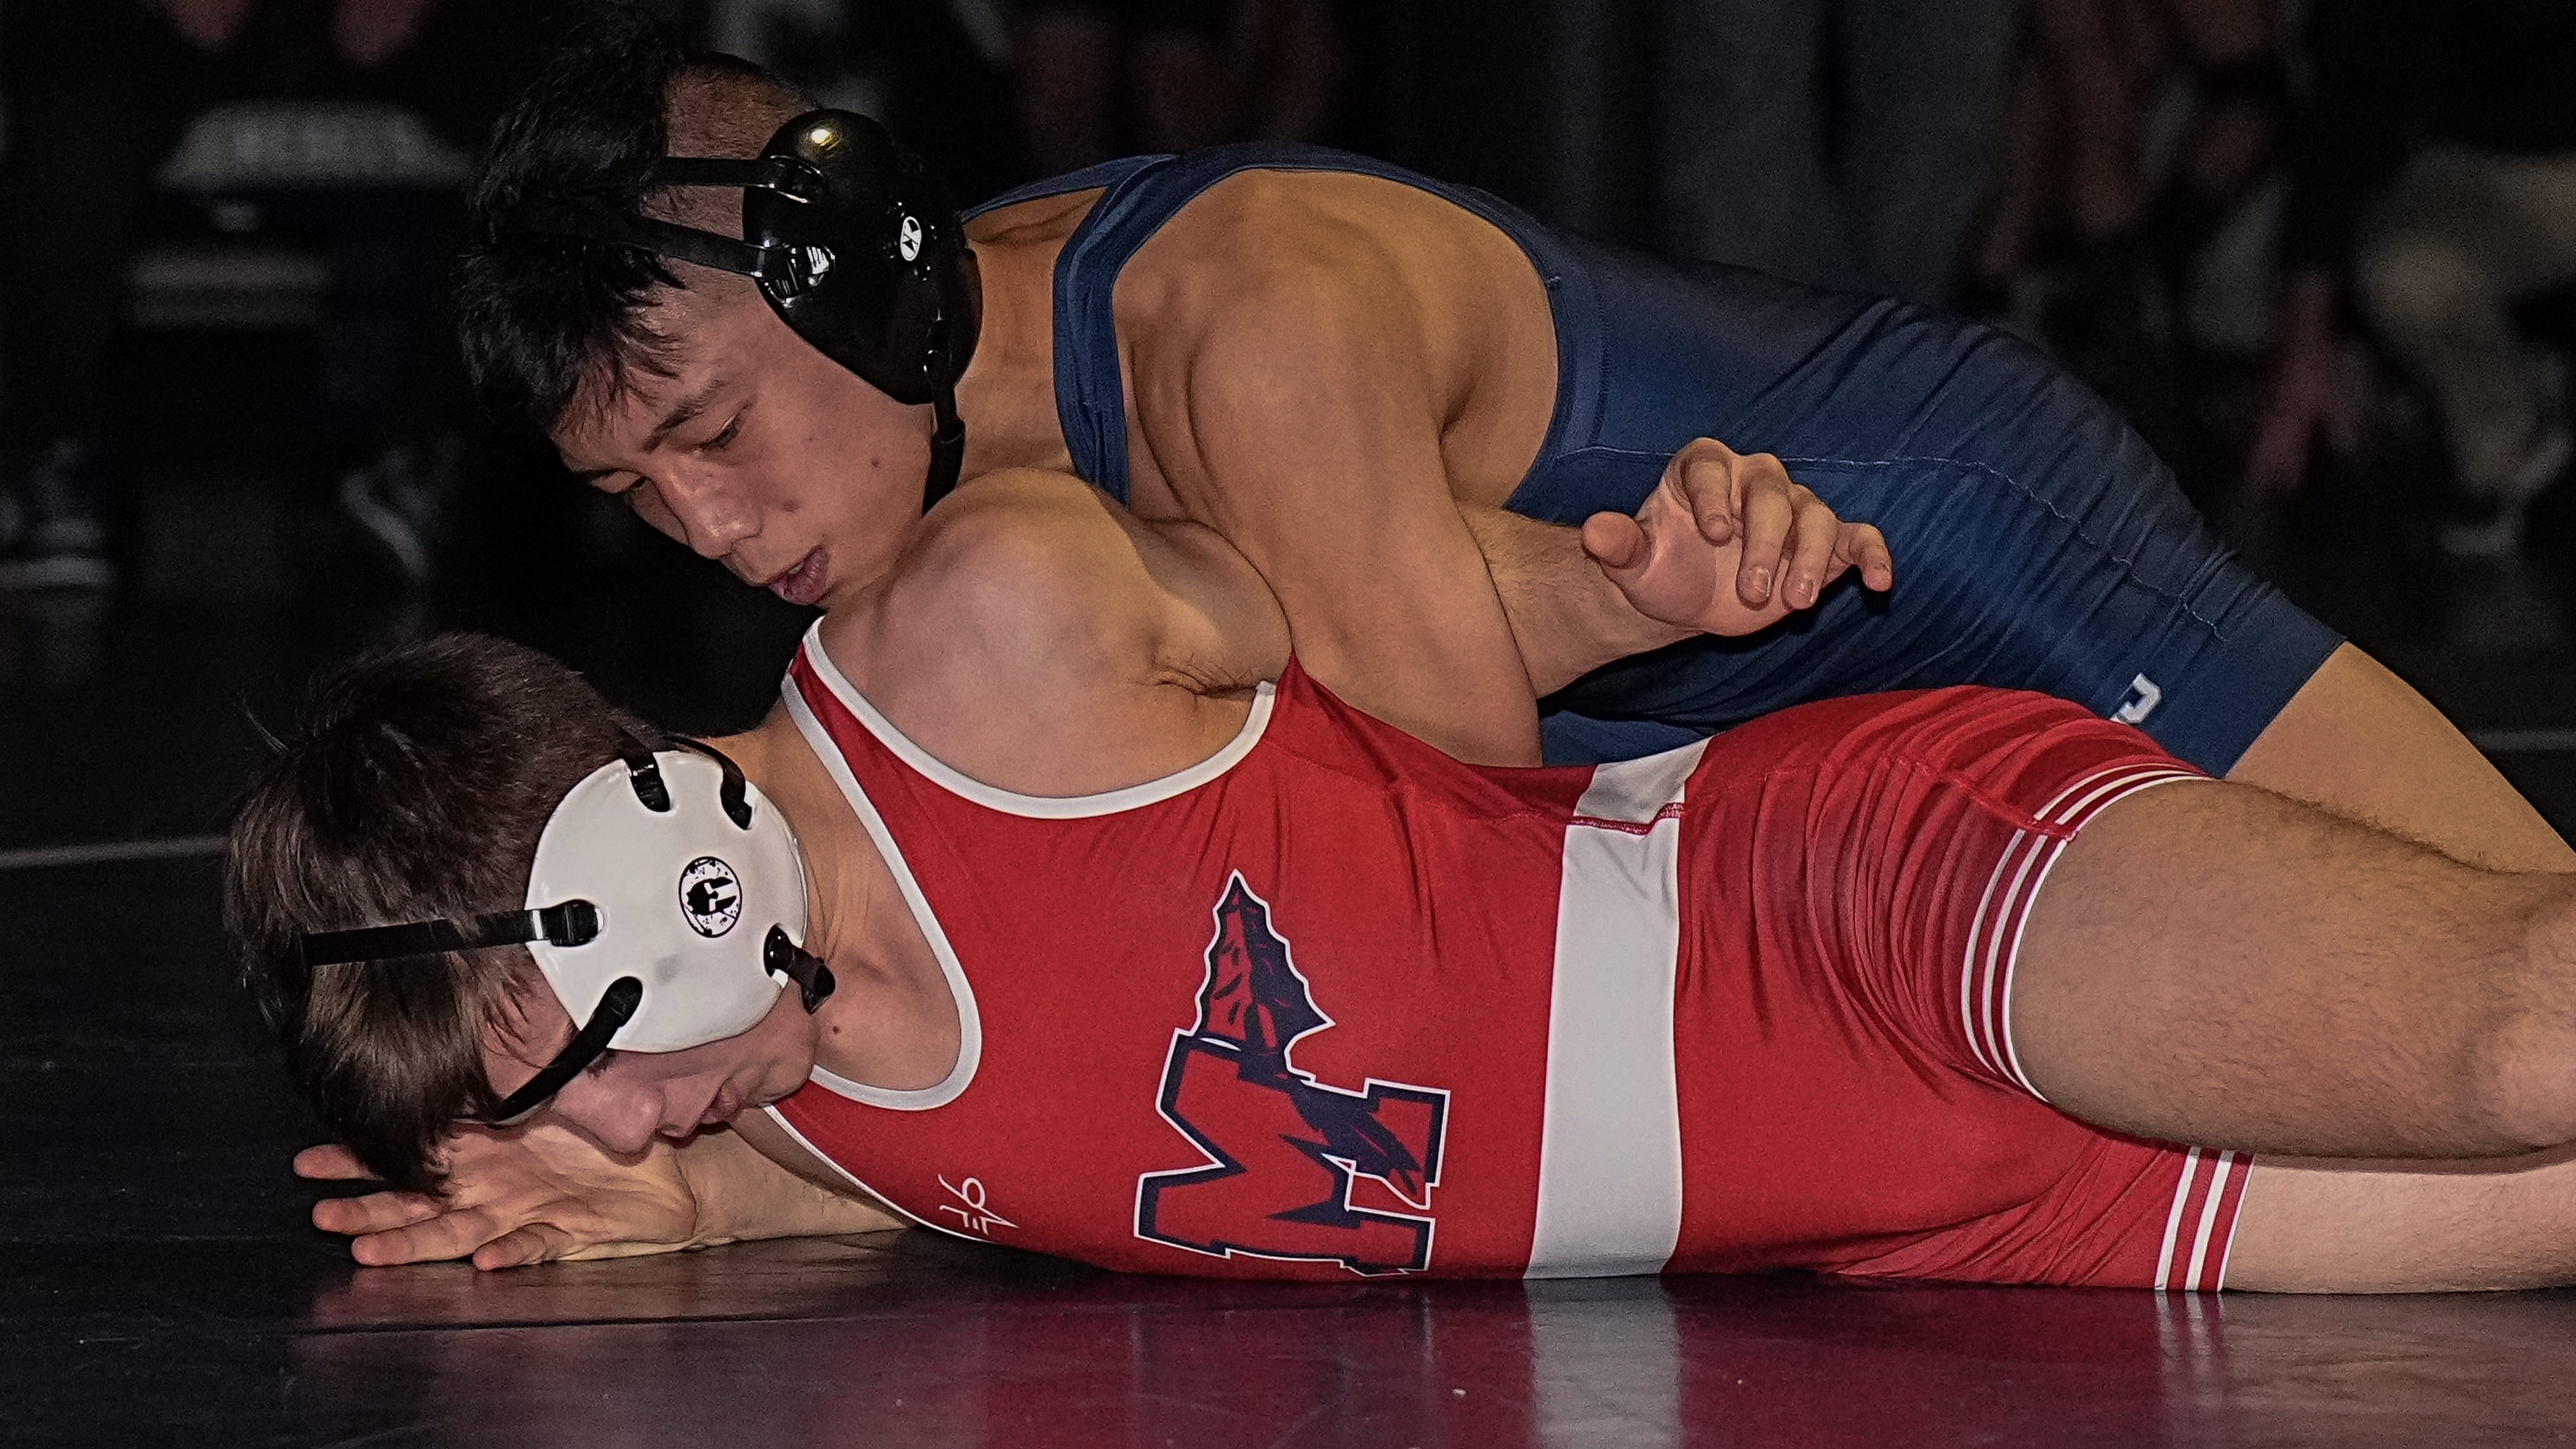 Revenge matches highlight Rockland County Championships